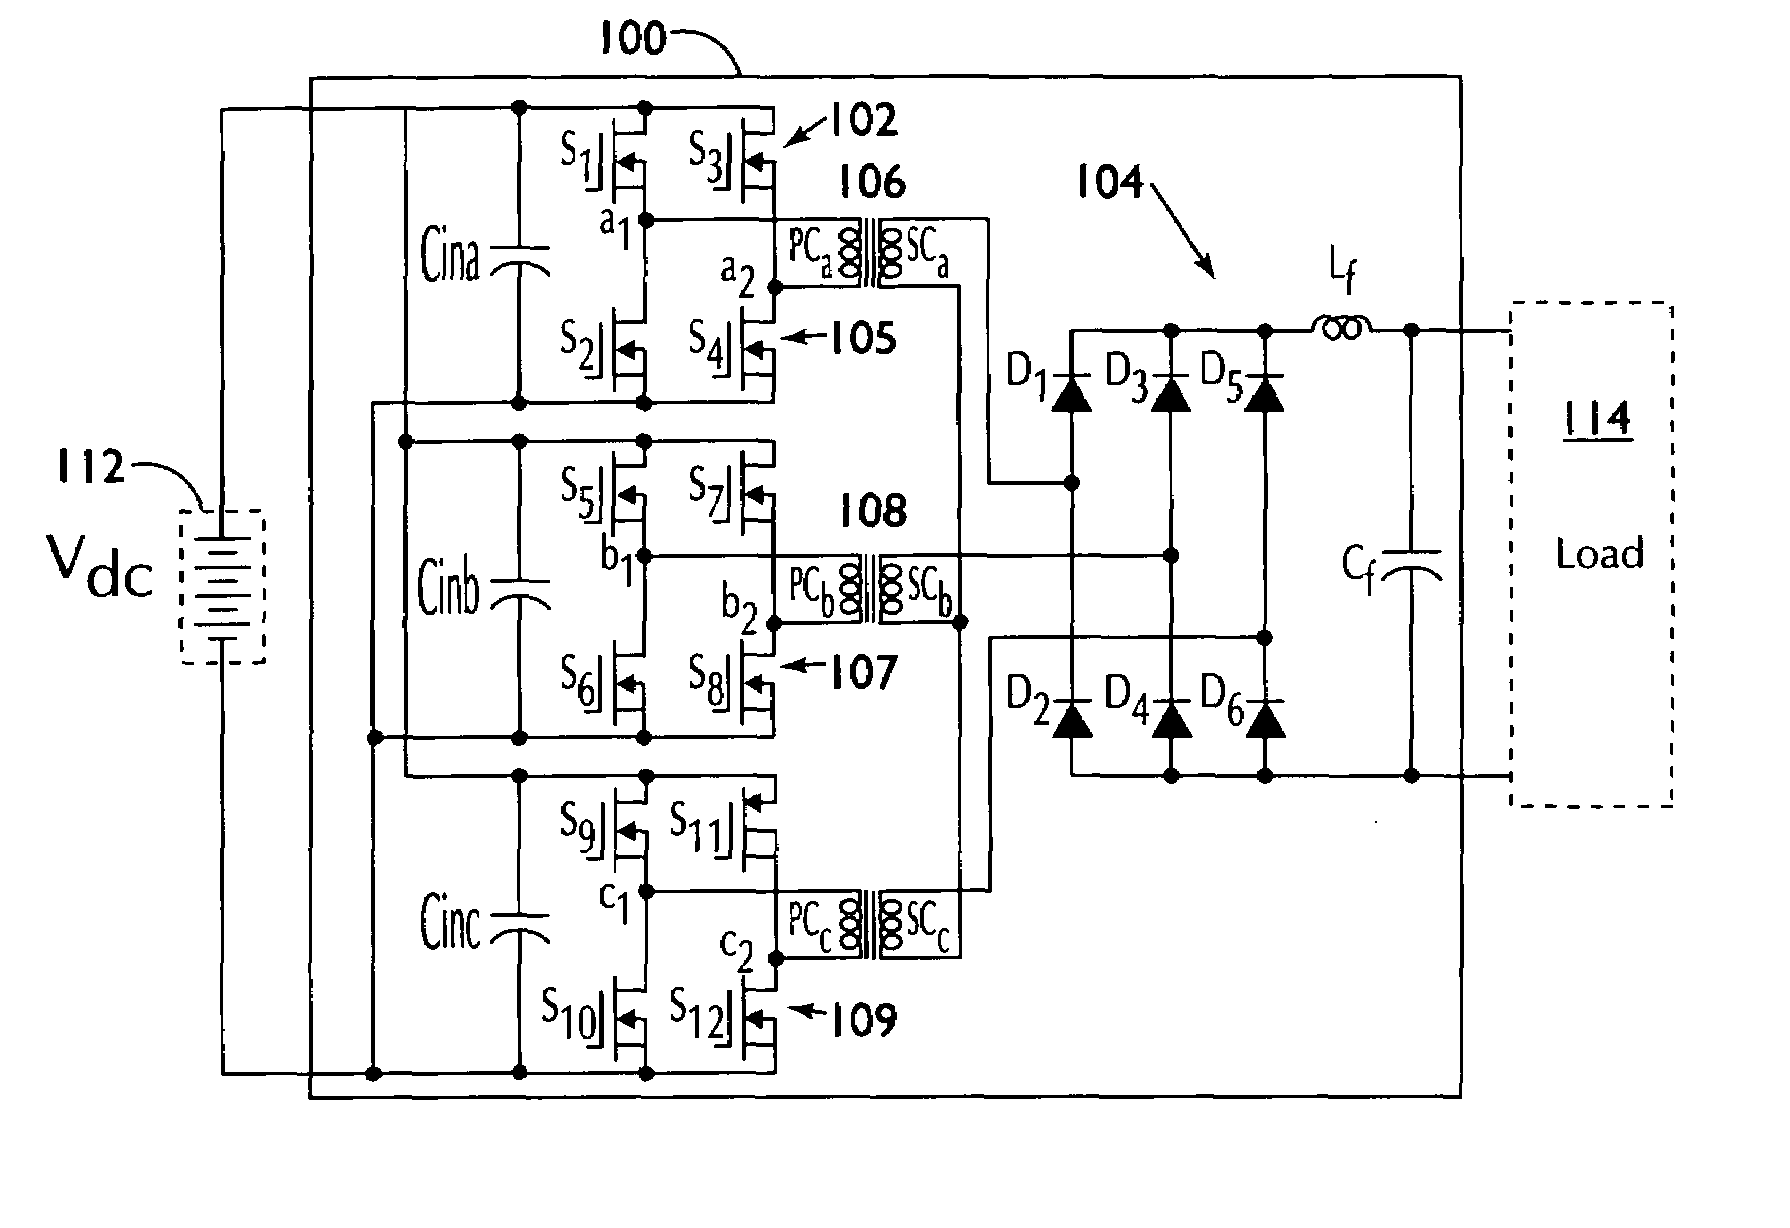 Multiphase soft switched DC/DC converter and active control technique for fuel cell ripple current elimination